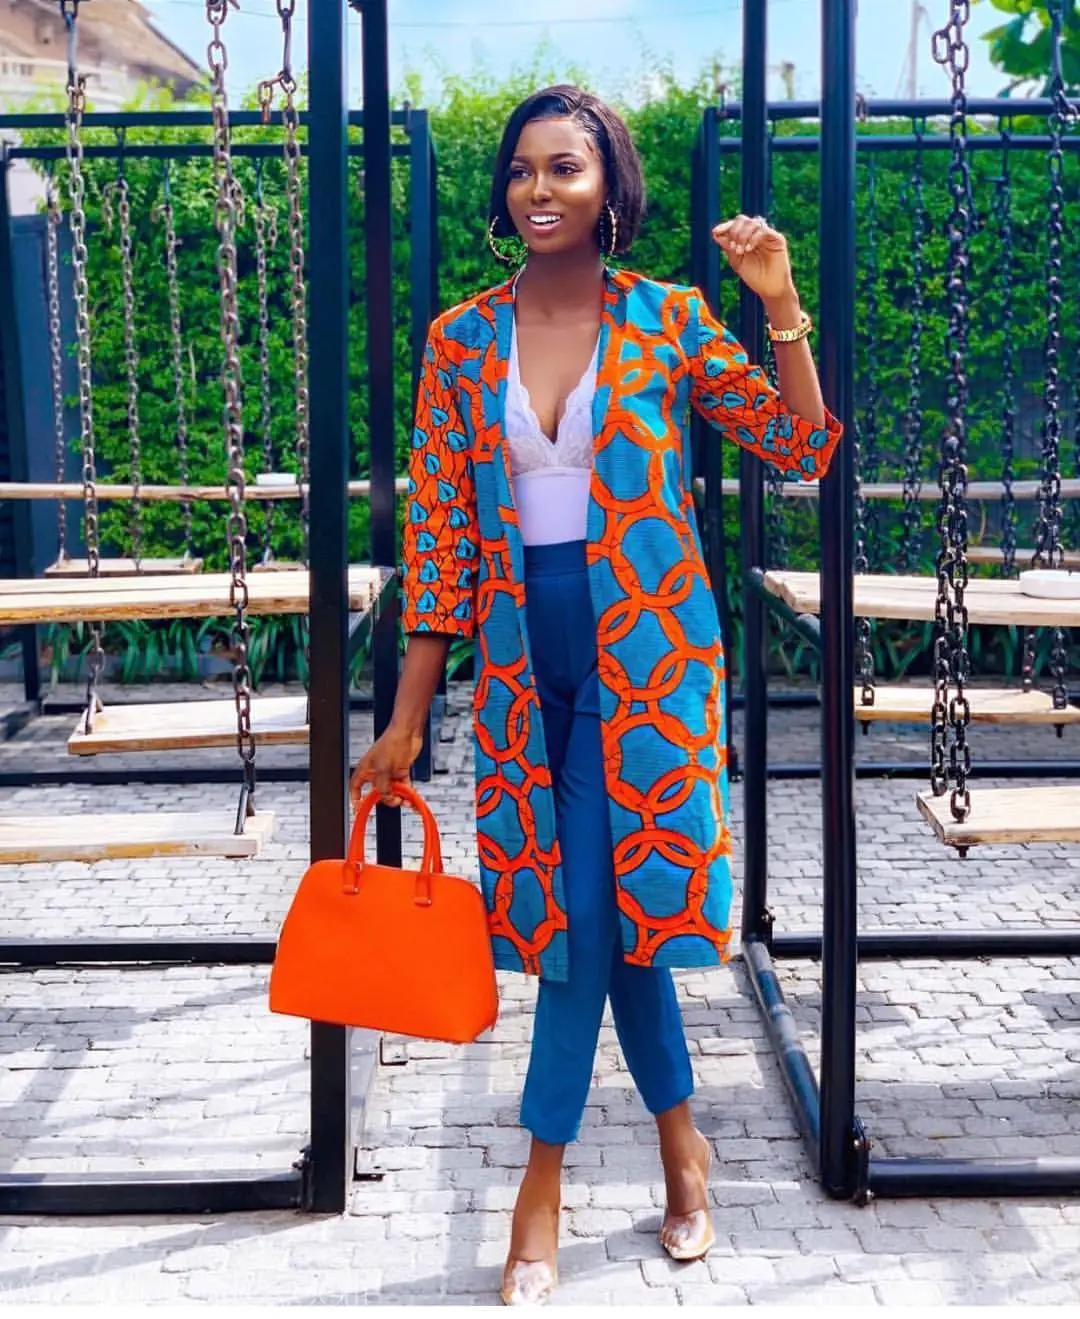 Olarslim Shows Us How To Wear Colors This Season